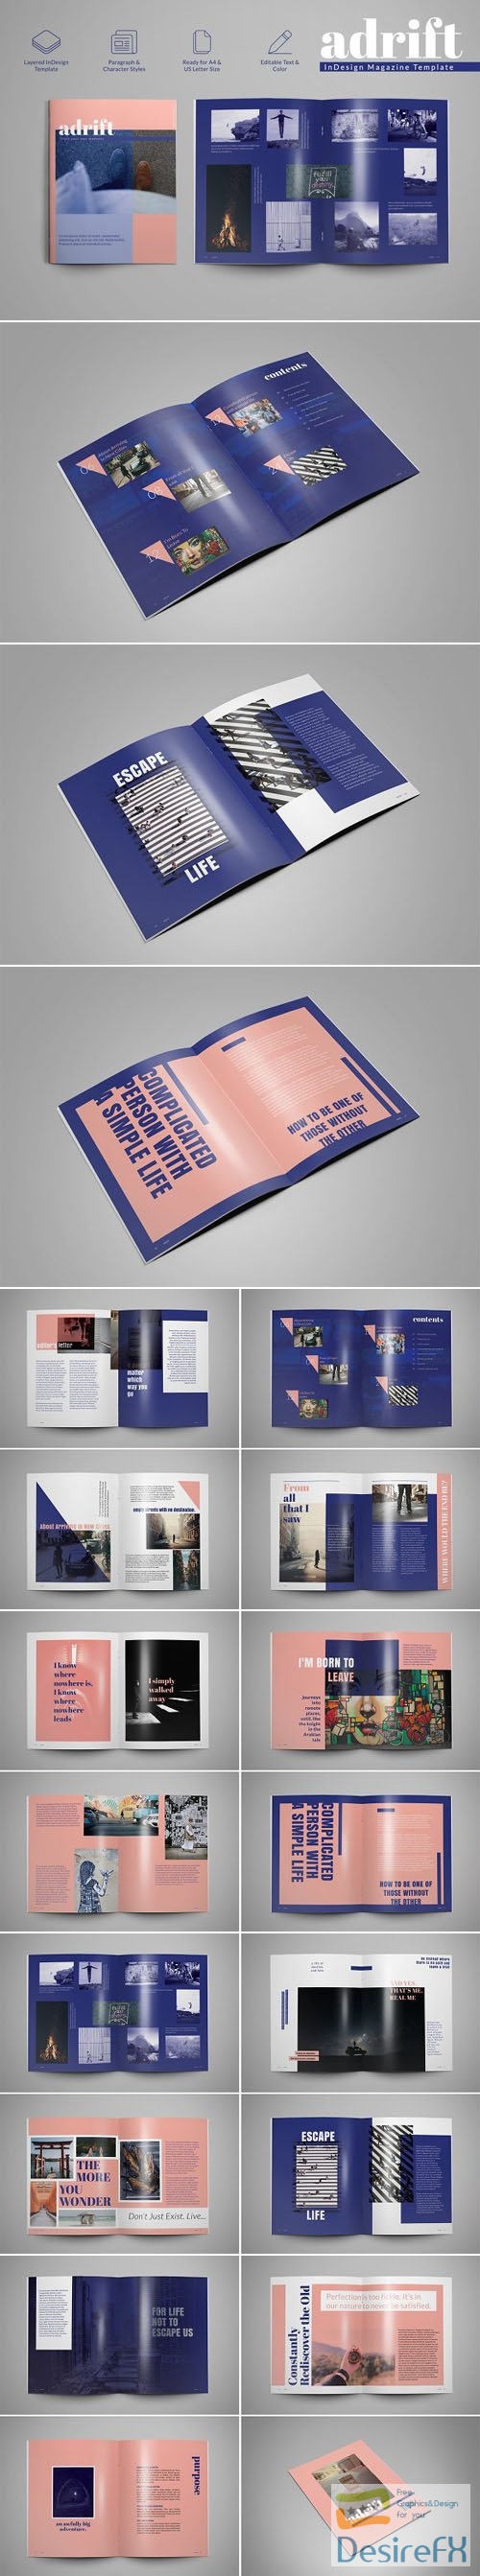 Adrift - InDesign Magazine Template US Letter/A4